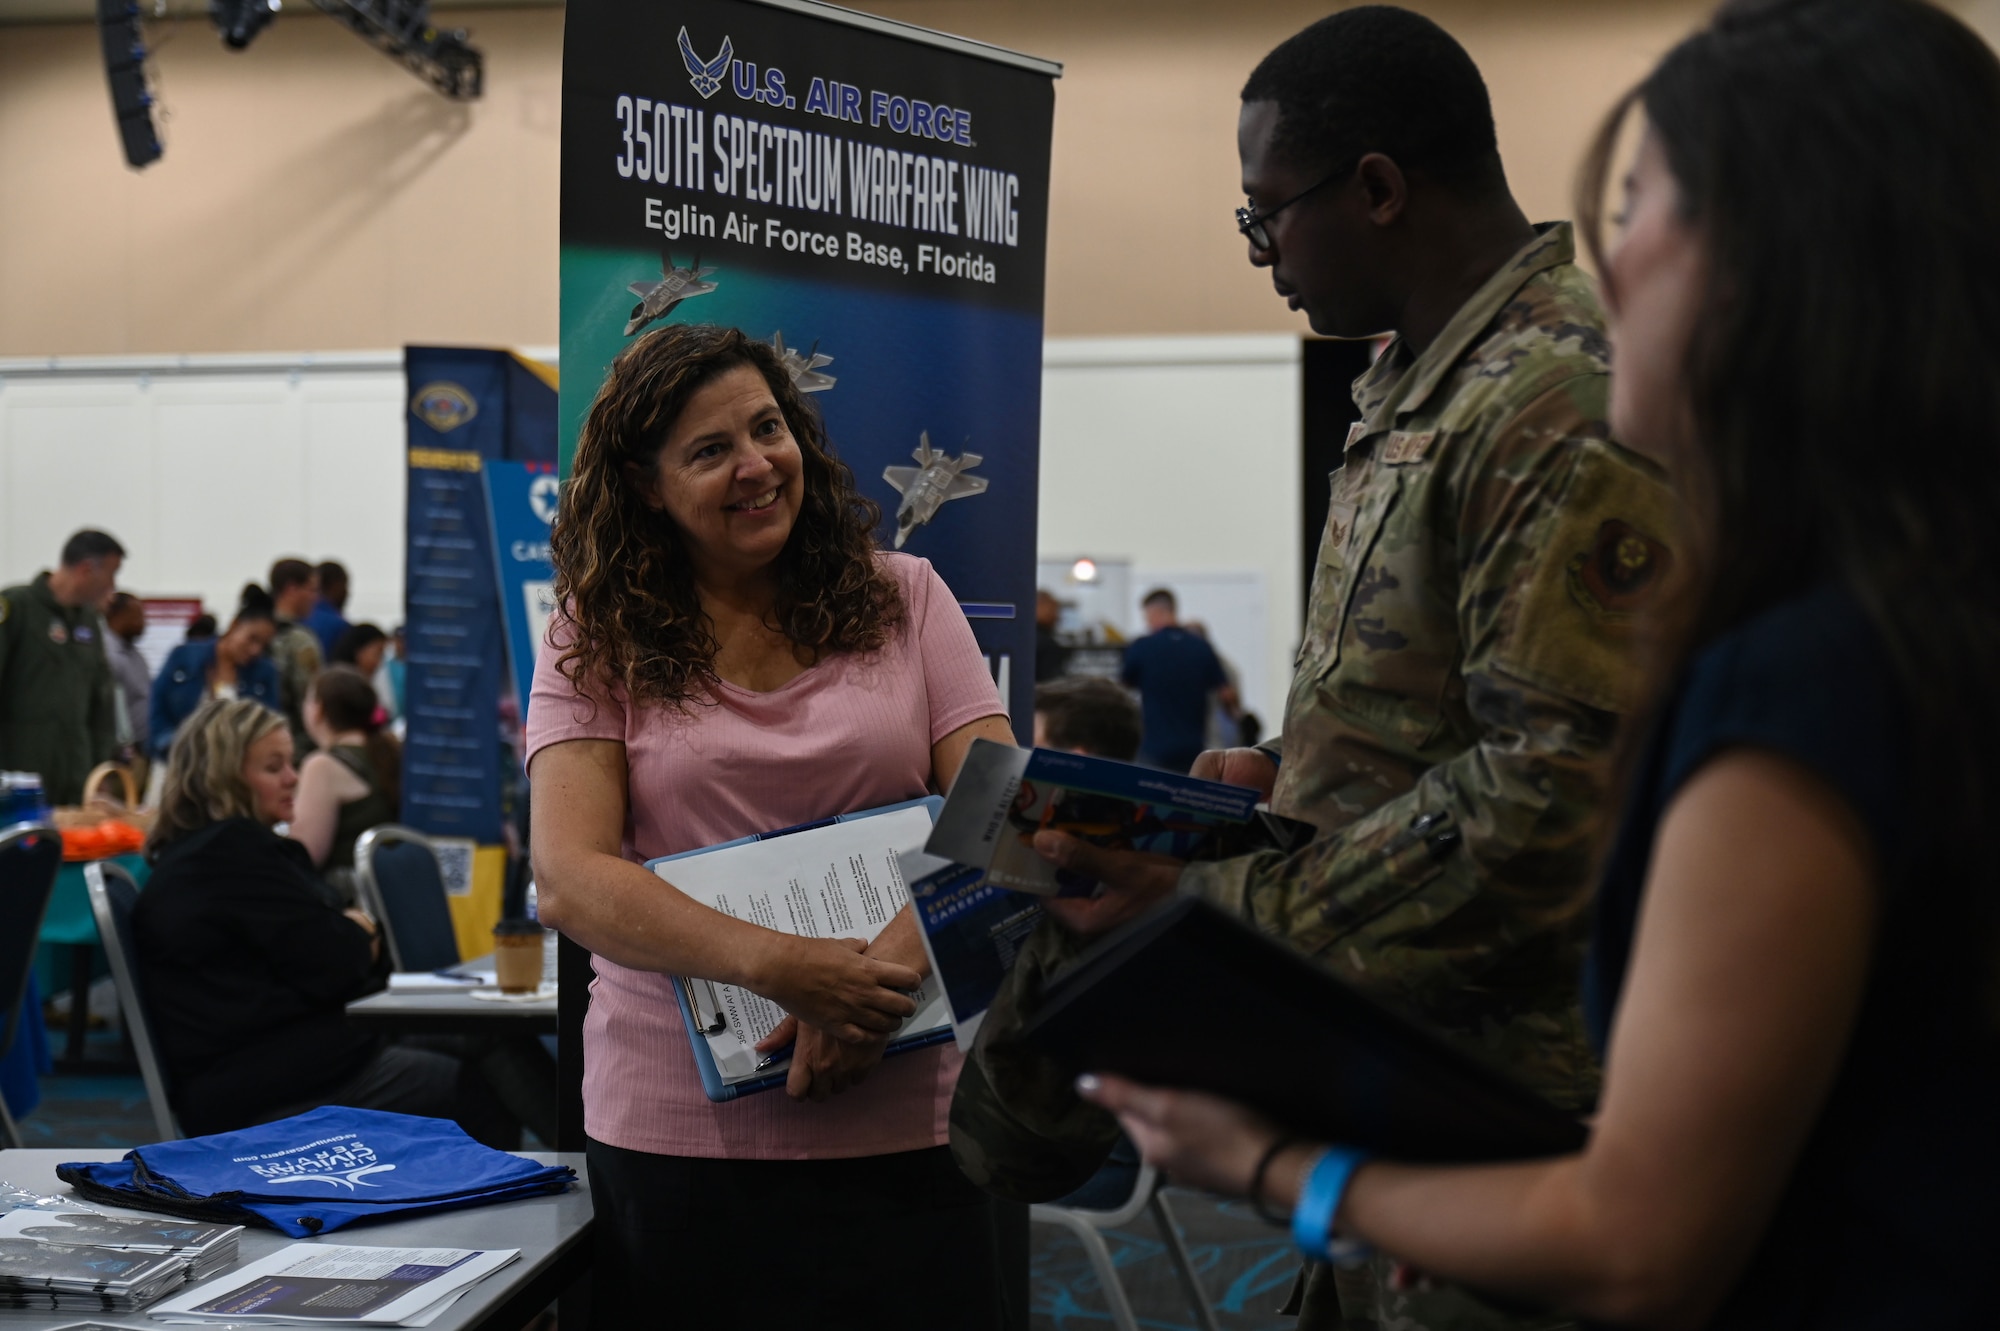 Traci L. Baart, 350th Spectrum Warfare Wing civilian personnel program specialist, talks with various individuals during a career summit at Fort Walton Beach, Fla., Aug. 17, 2023. The in-person event brought together employers and job seekers who are currently ready to work as well as those planning for the future. (U.S. Air Force photo by Staff Sgt. Ericka A. Woolever)